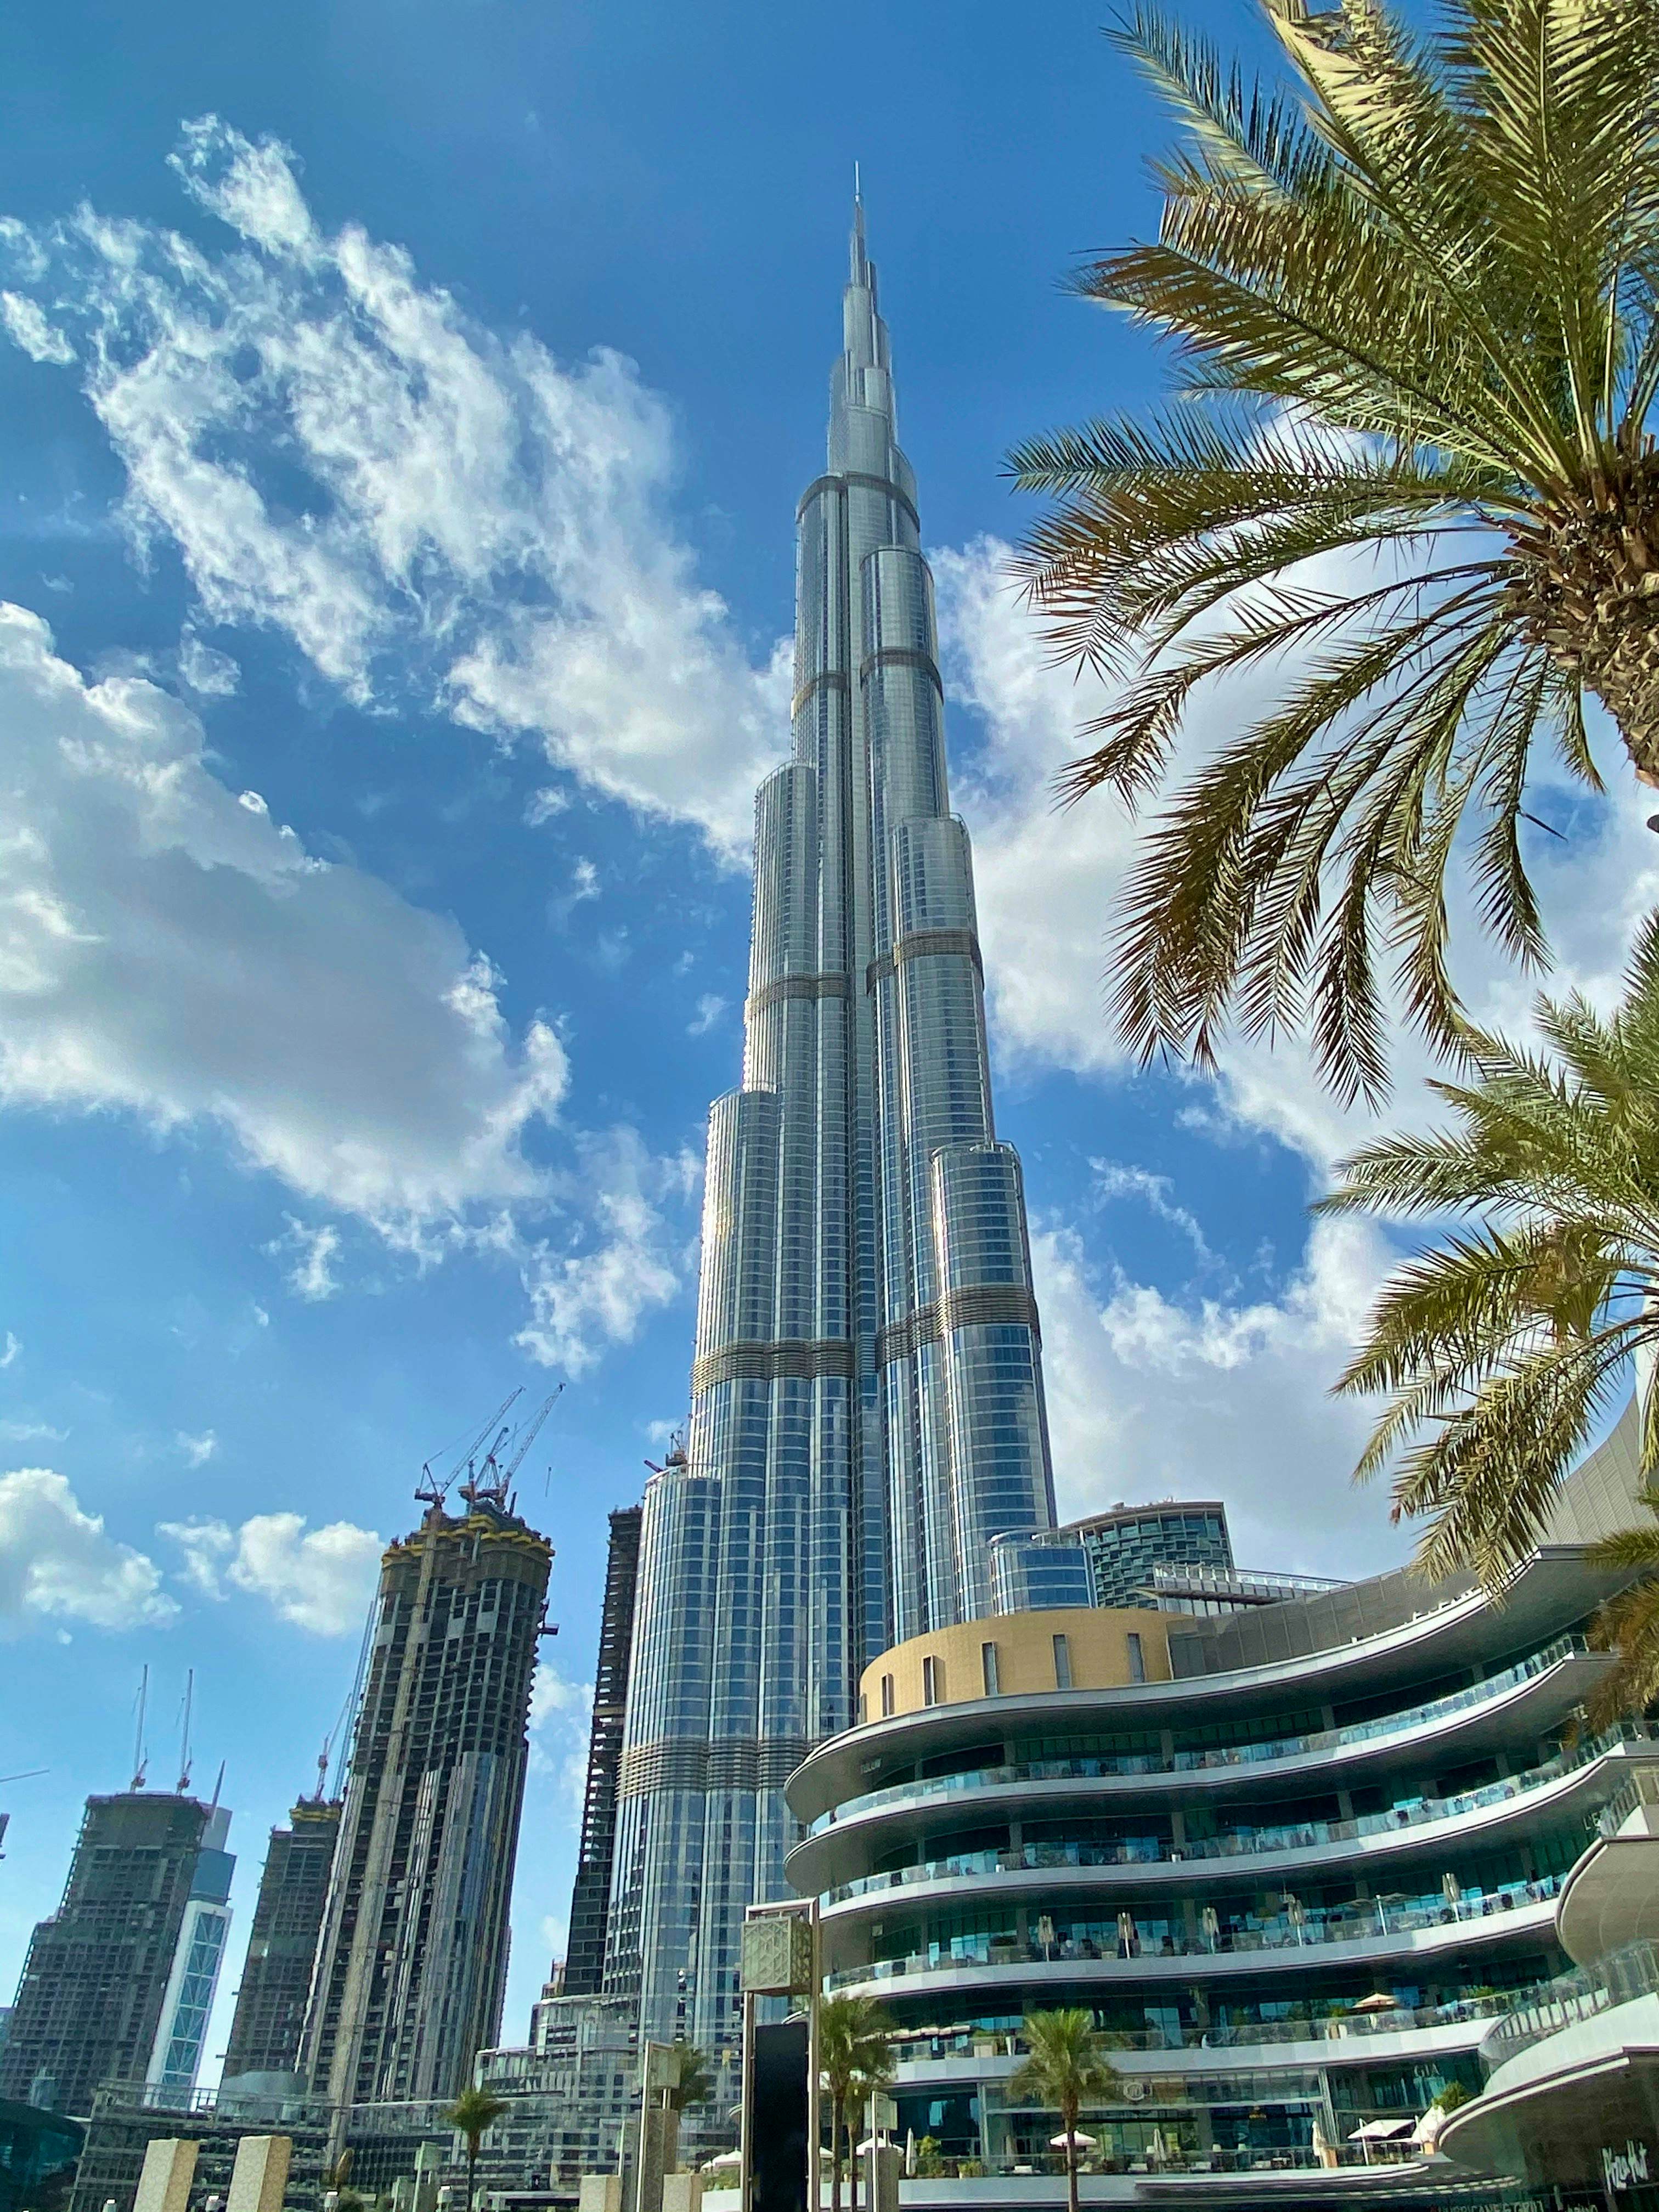 Burj Khalifa 124 And 125 Floor Prime Hours And Dubai Aquarium With Underwater Zoo With Private Transfers